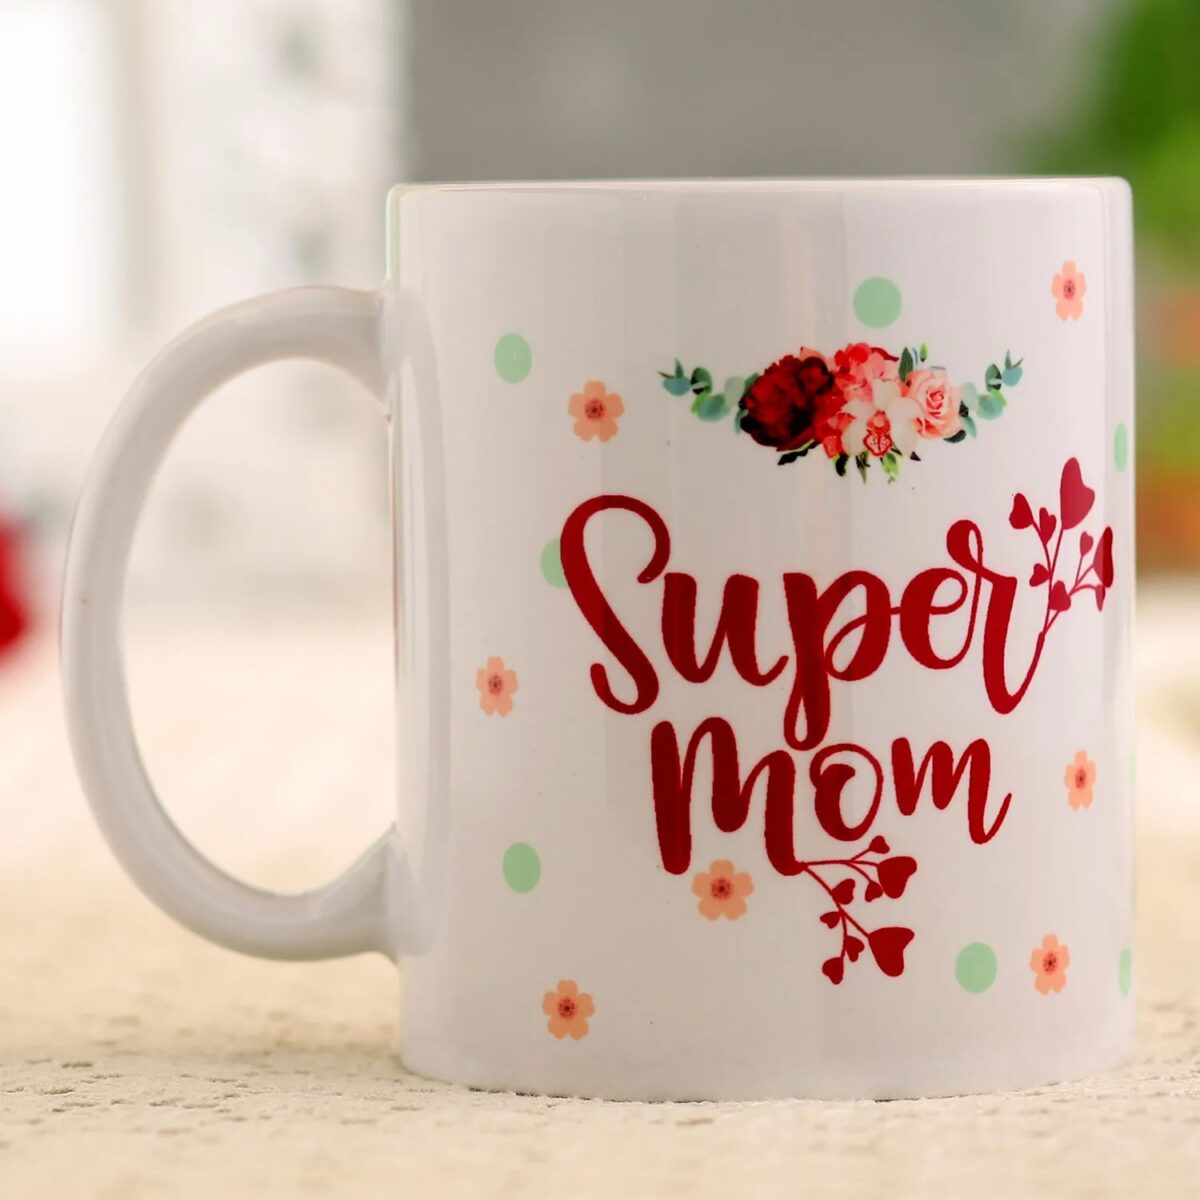 Artistic Mug For Mother's Day